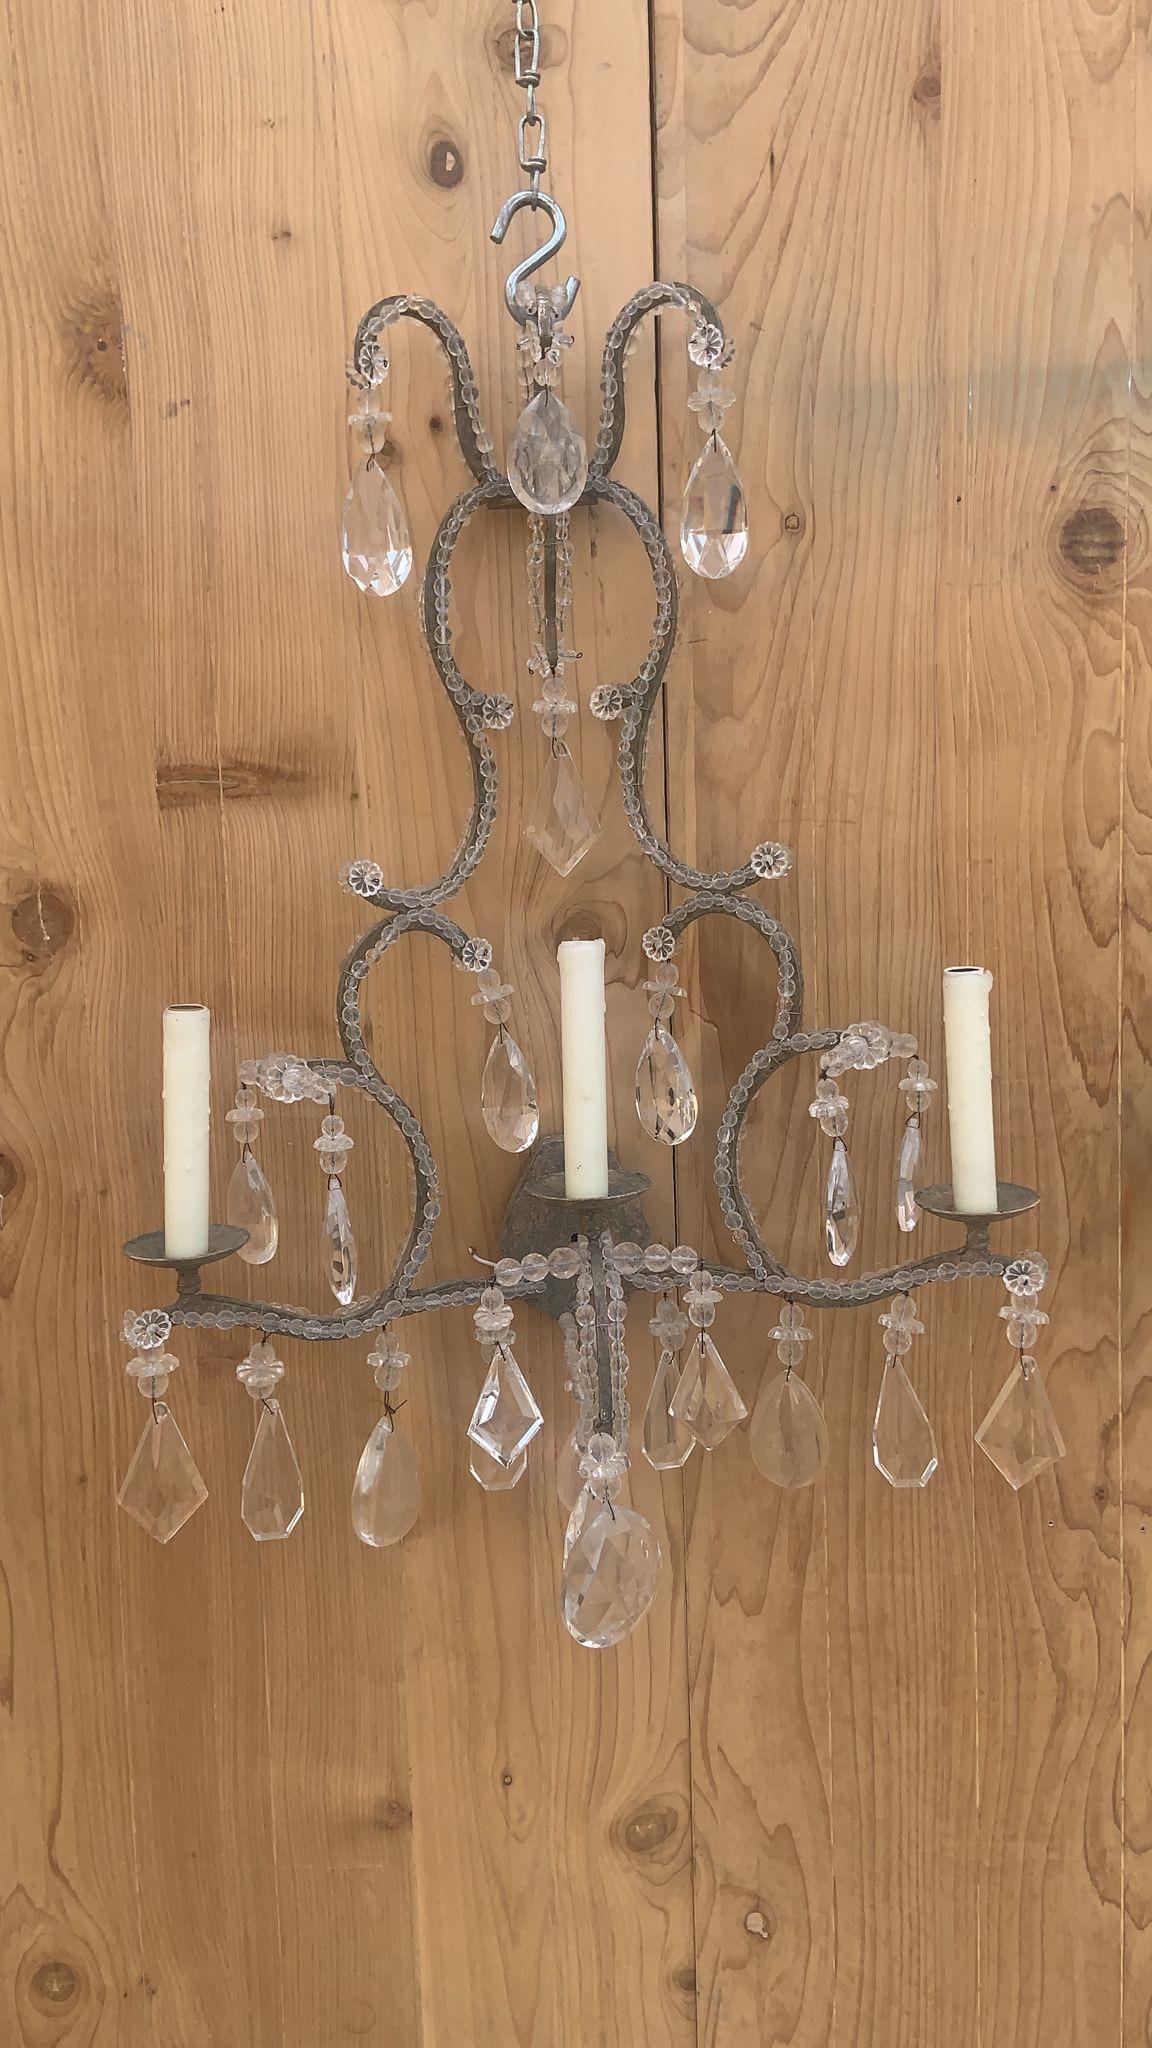 Mid-20th Century Dennis & Leen French Louis XIV Style Iron & Crystal Beaded Wall Sconces - Pair For Sale